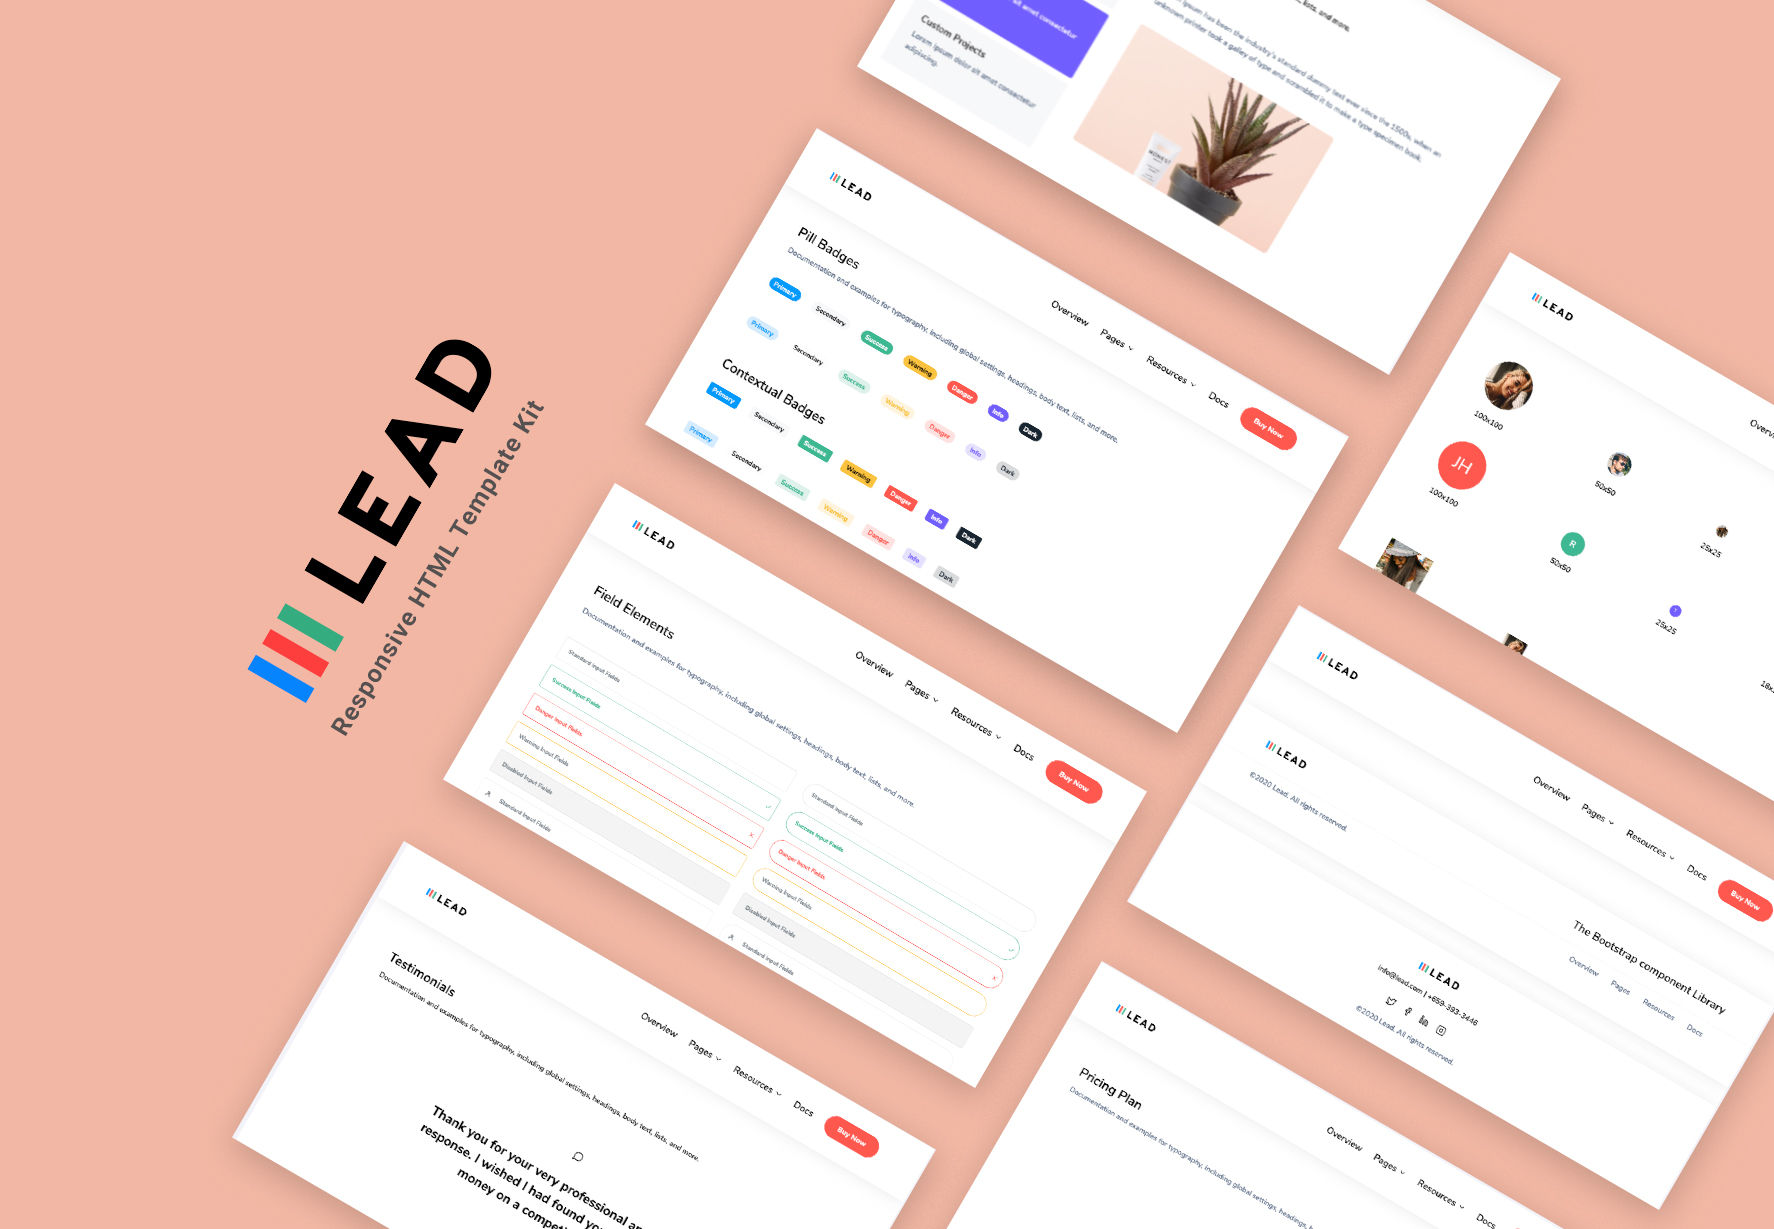 lead is the best responsive html template kit